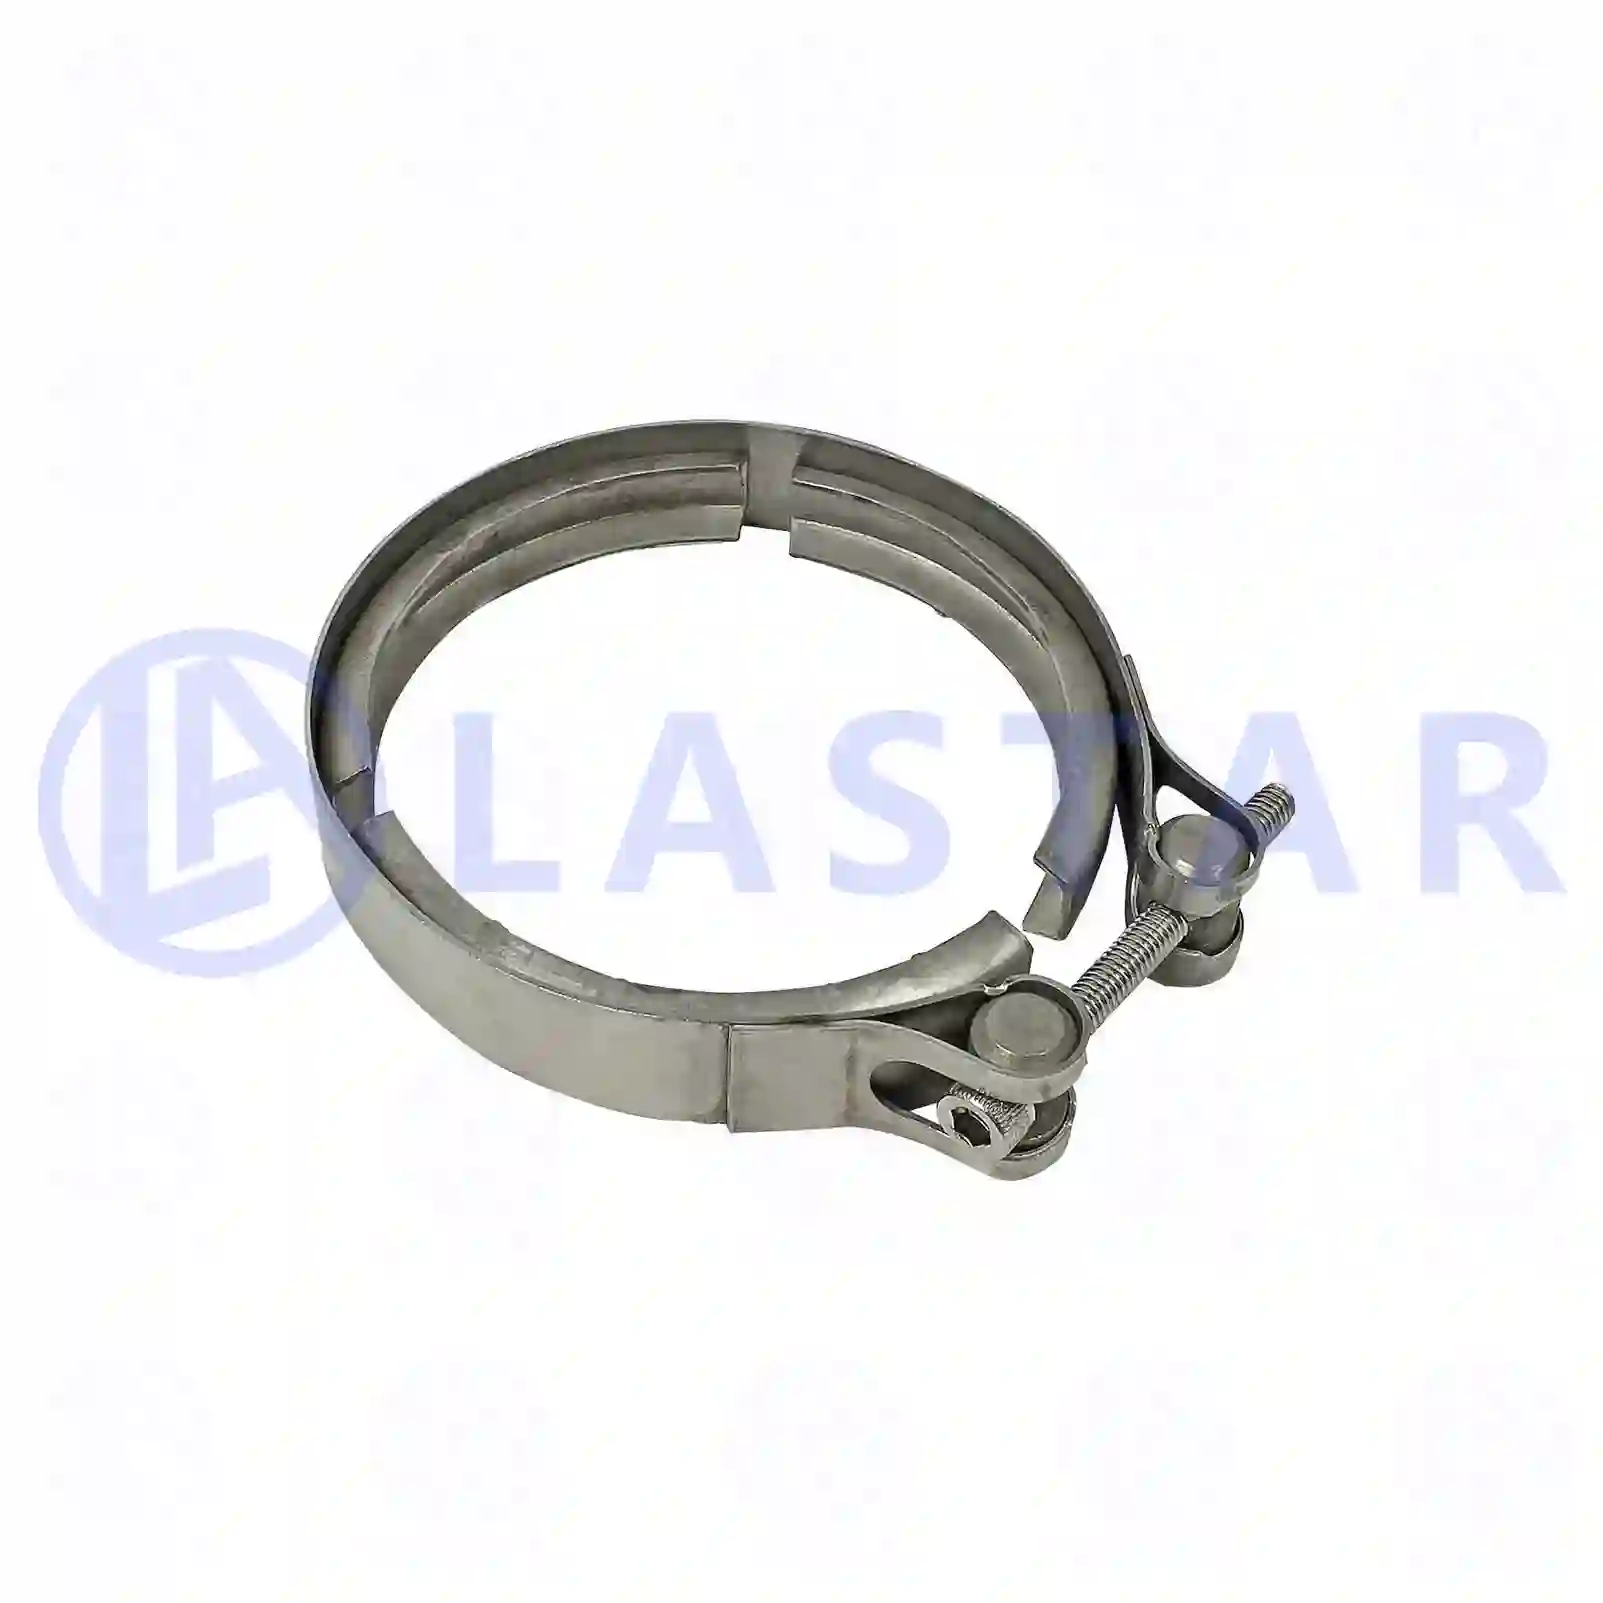 Clamp, 77709915, 1340727, 1439825, ZG00326-0008 ||  77709915 Lastar Spare Part | Truck Spare Parts, Auotomotive Spare Parts Clamp, 77709915, 1340727, 1439825, ZG00326-0008 ||  77709915 Lastar Spare Part | Truck Spare Parts, Auotomotive Spare Parts